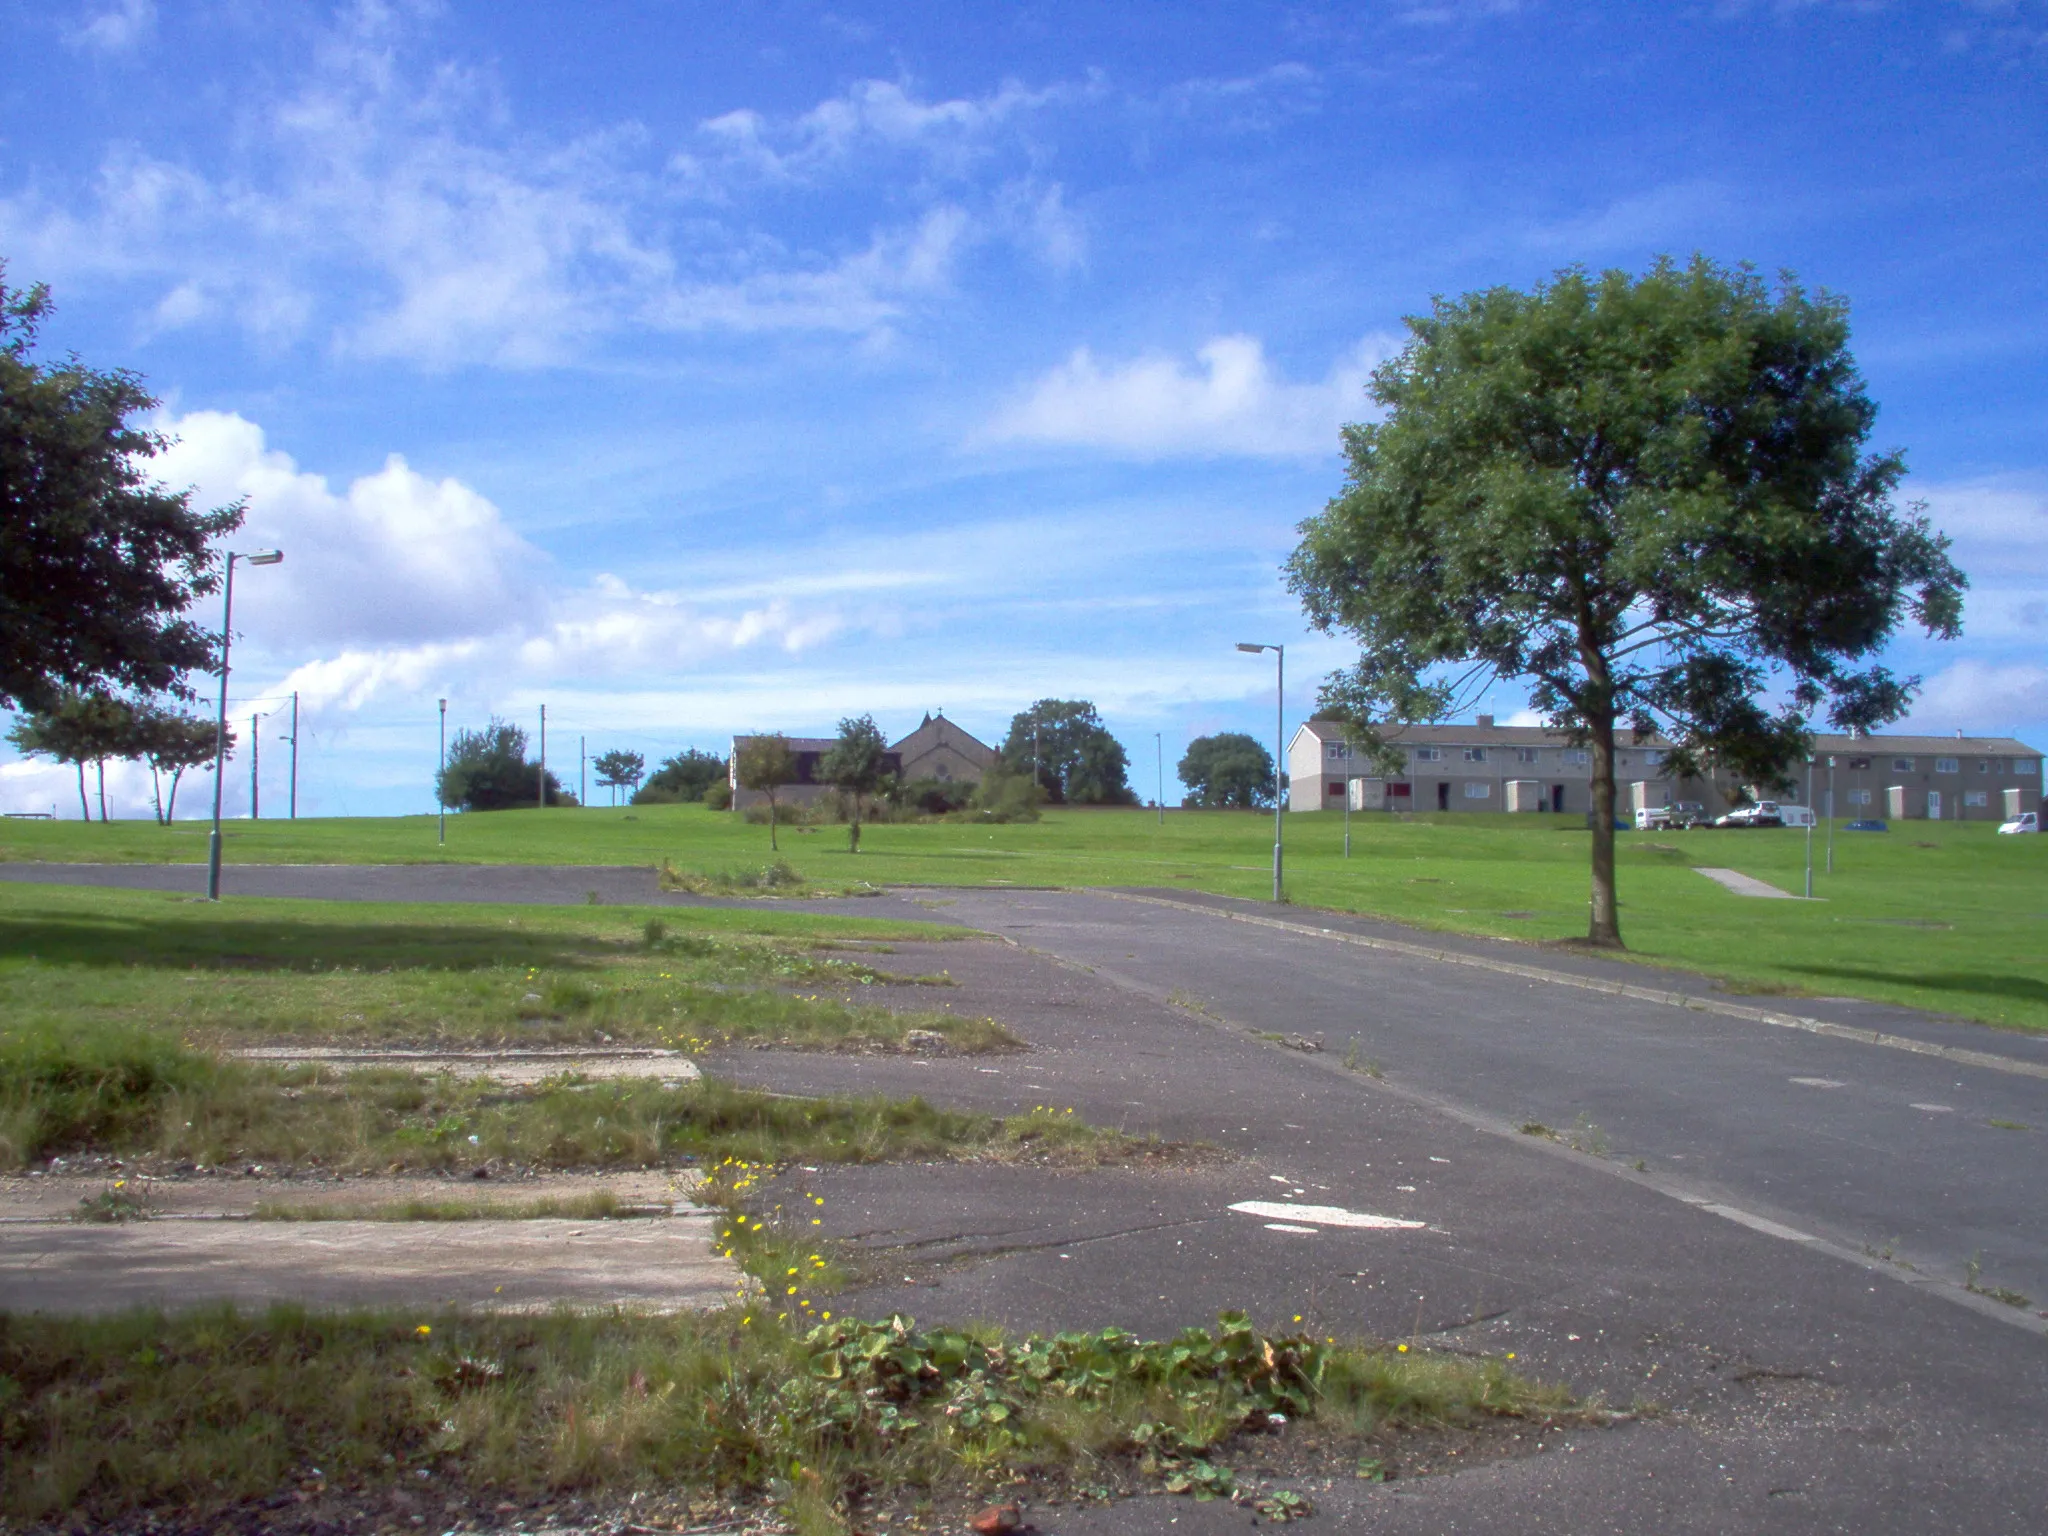 Photo showing: The site of the former Coopers Close Housing Estate, Thornley, Co Durham. One street of Coopers Close houses remains on the site of the former Coopers Terrace prefabs. St Bartholomew's Church can also be seen to the rear. The area in the foreground was a children's recreation ground prior to the building of the estate.